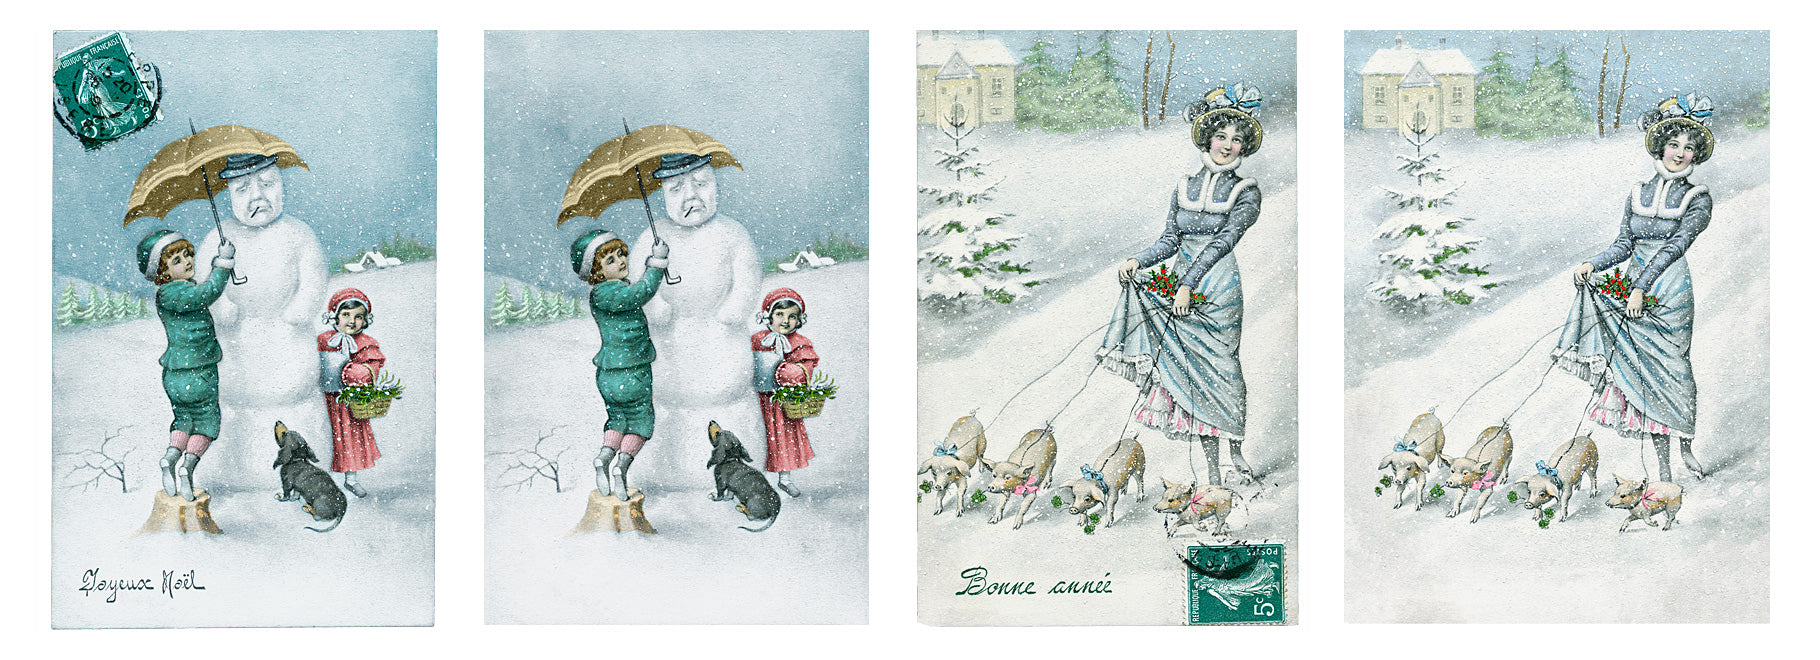 Vintage French Christmas winter holiday snow scene with children digital graphics.